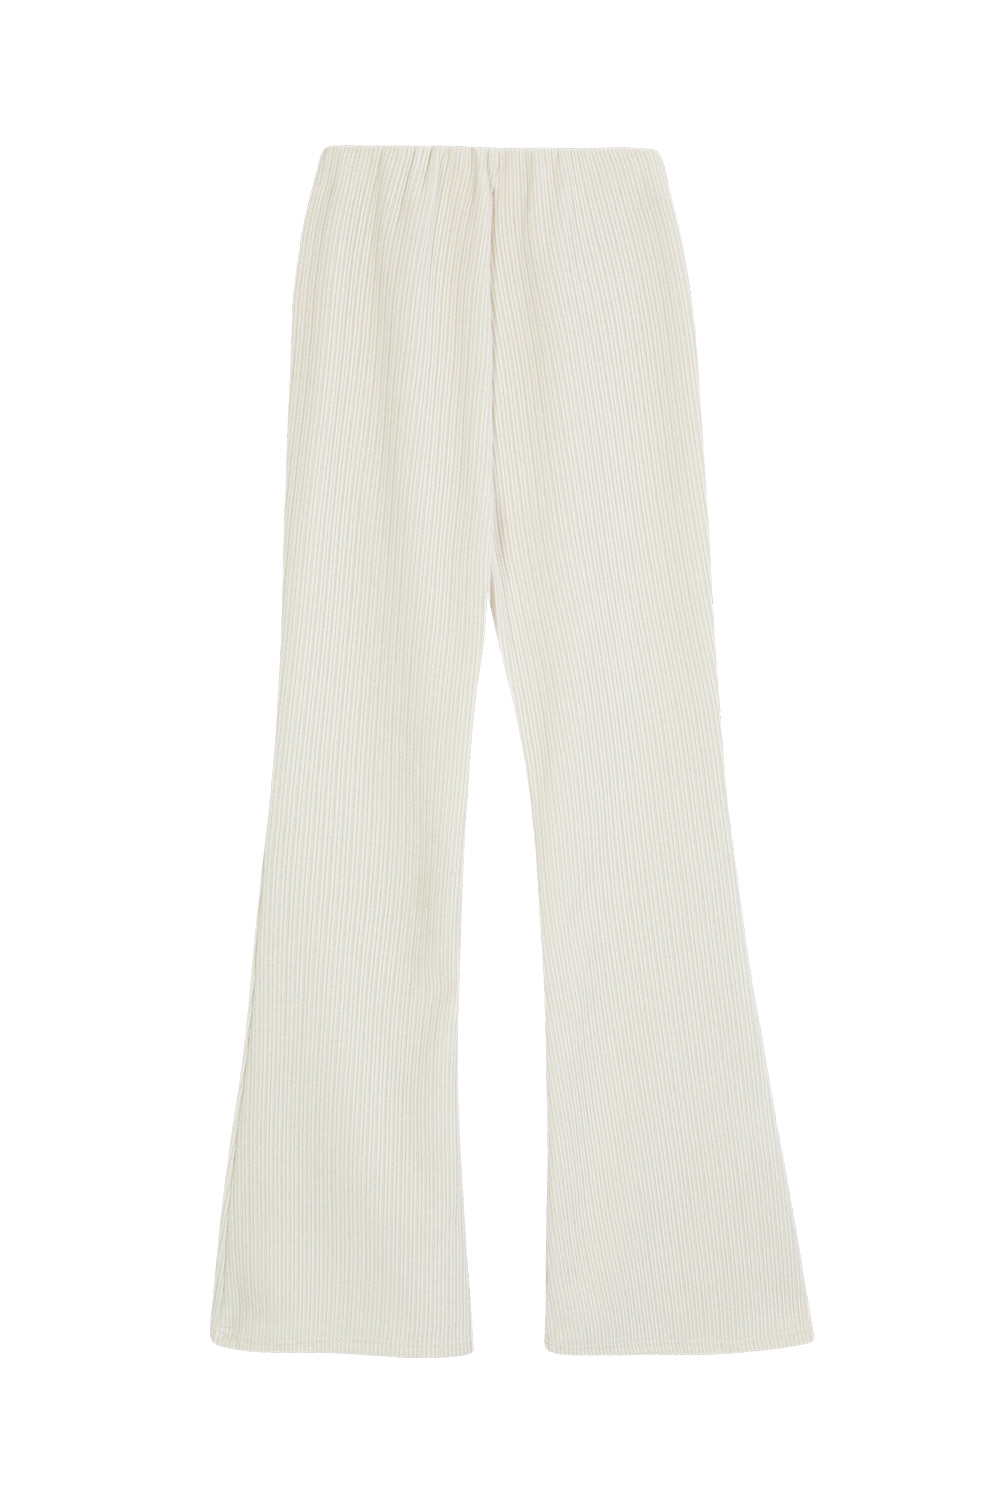 [10%]Bell pants_Ivory